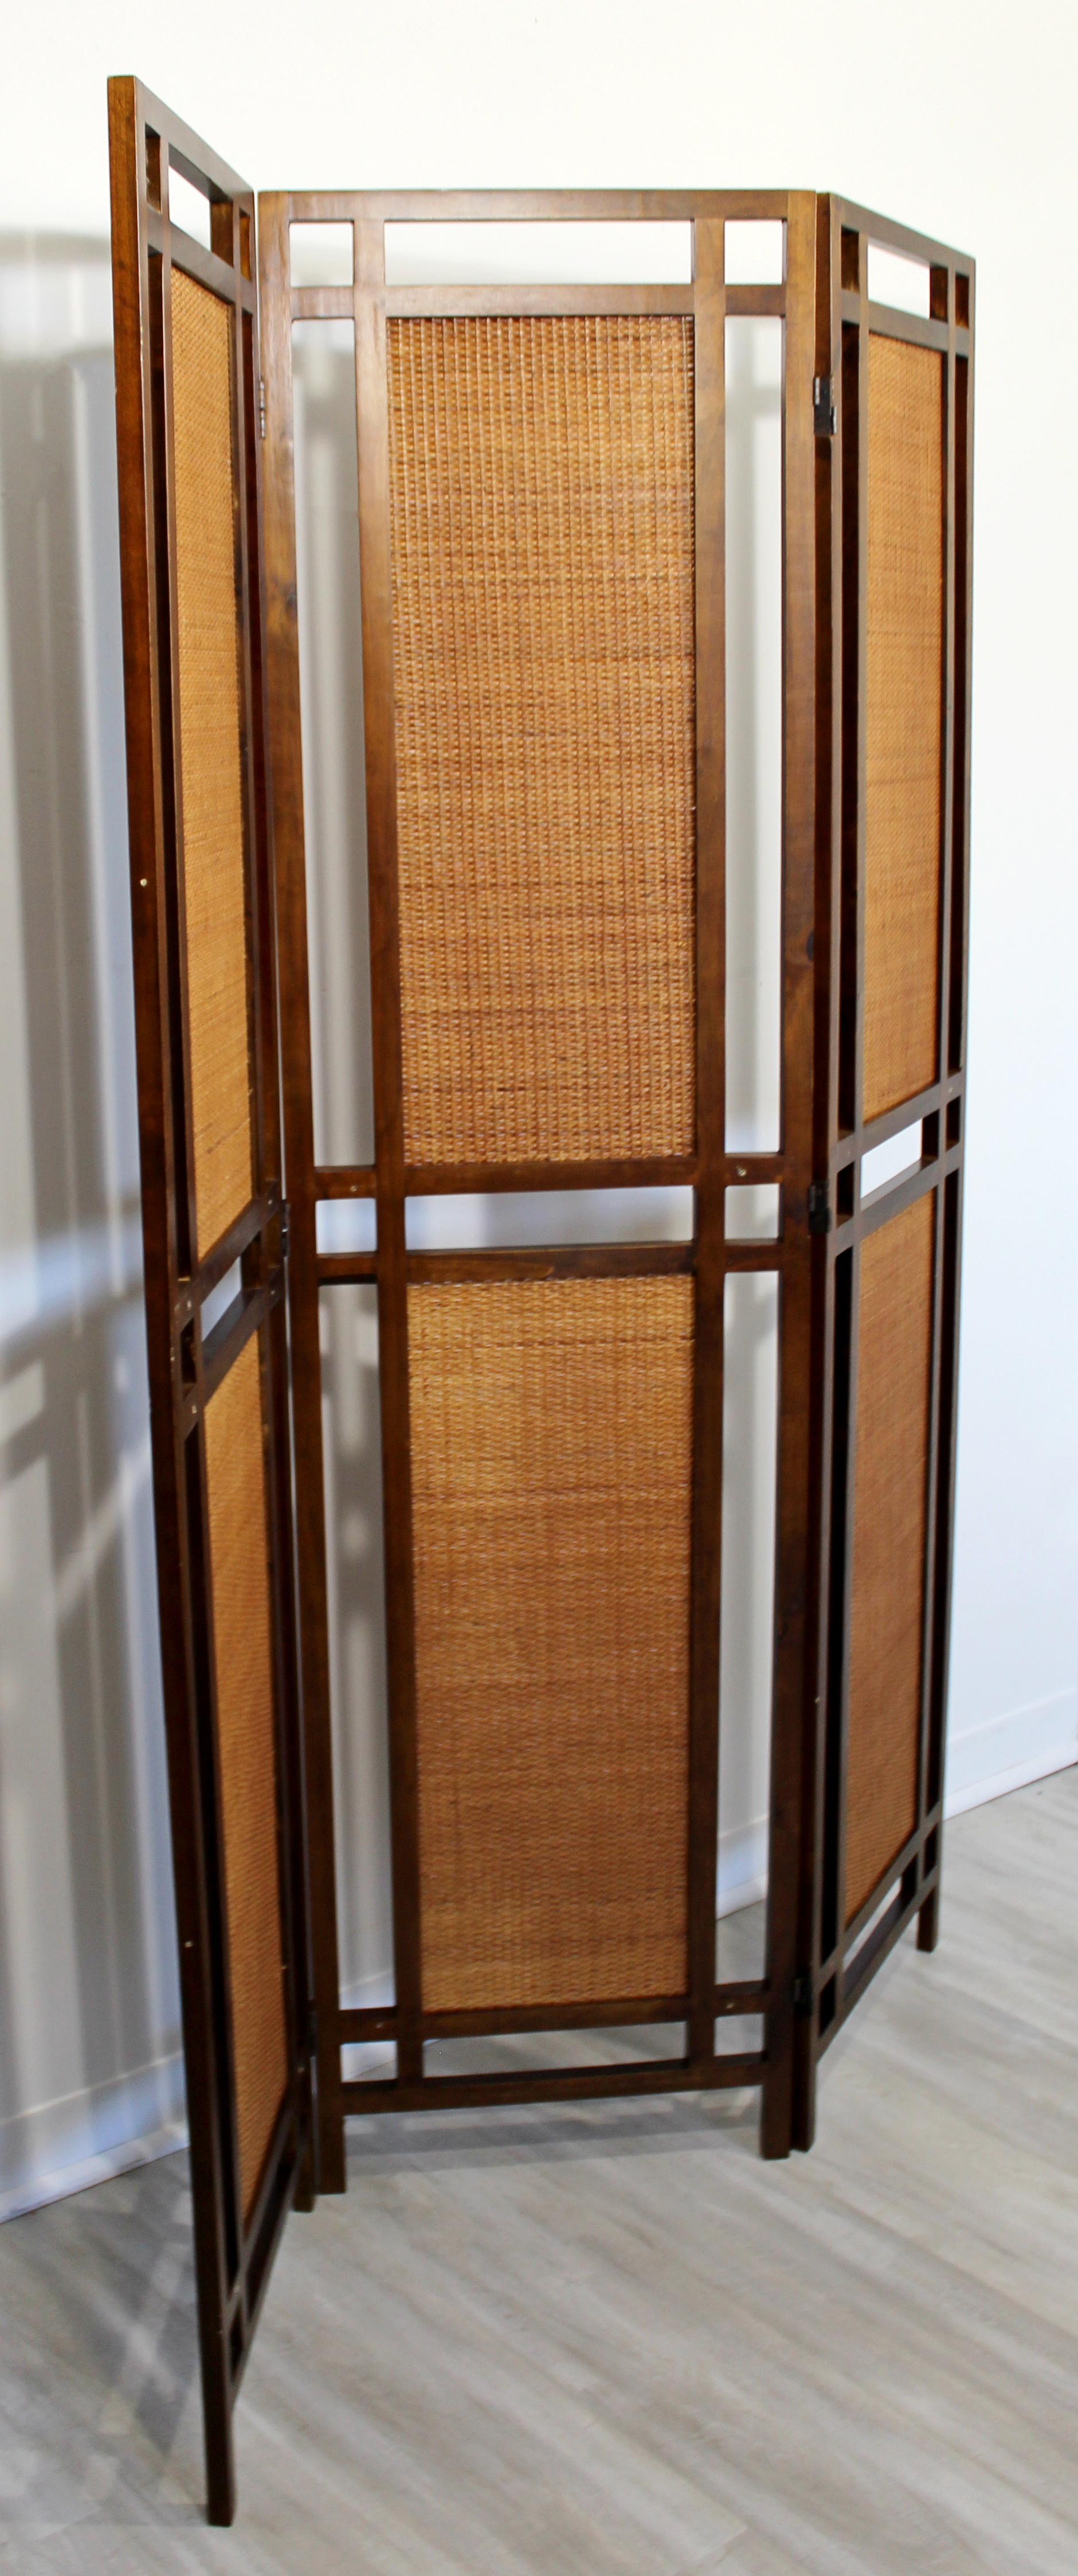 For your consideration is a gorgeous, three panel, free standing room divider screen, made of walnut wood and rattan, circa the 1960s. In very good vintage condition. The dimensions are 70